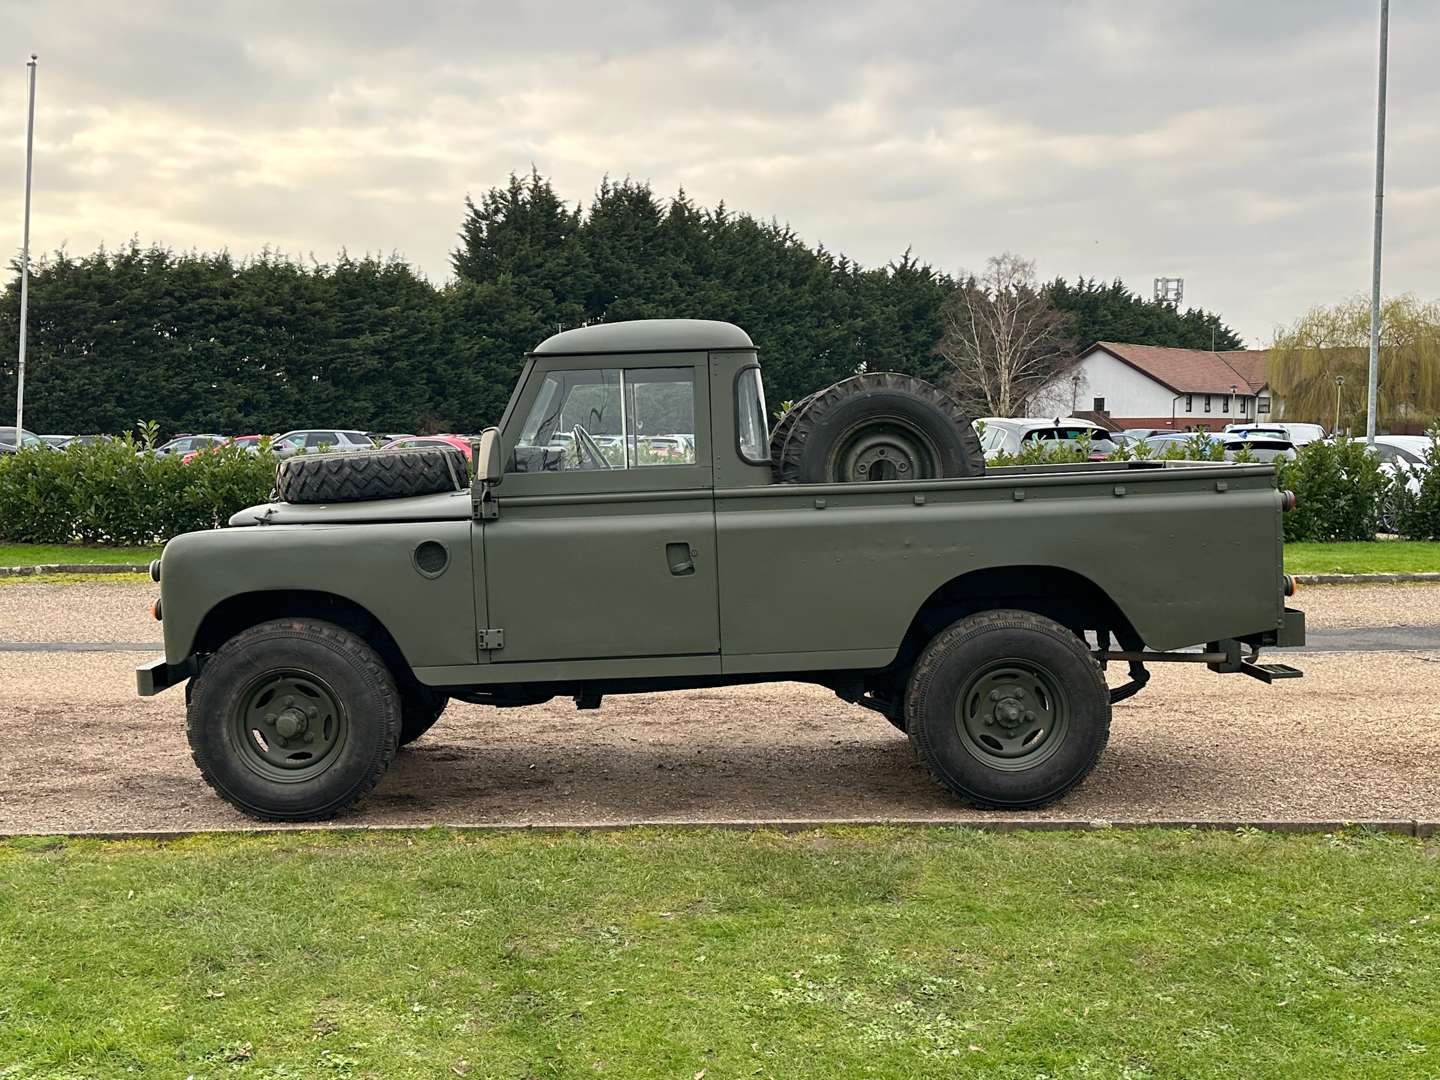 1992 LAND ROVER SERIES III PICK-UP - Image 4 of 25